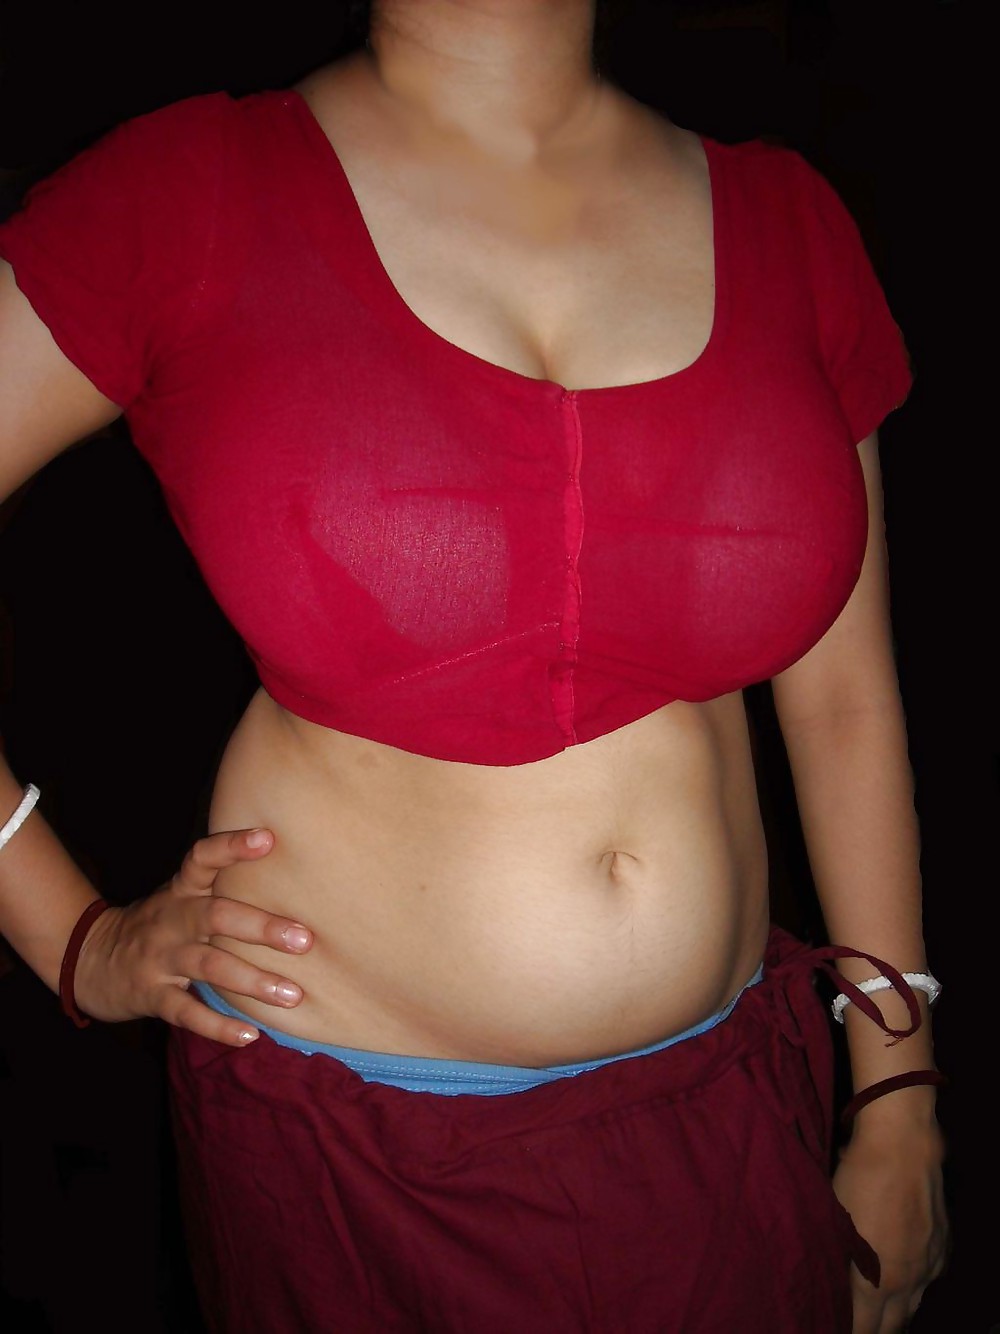 INDIAN AMATEUR COLLECTION I #8047264